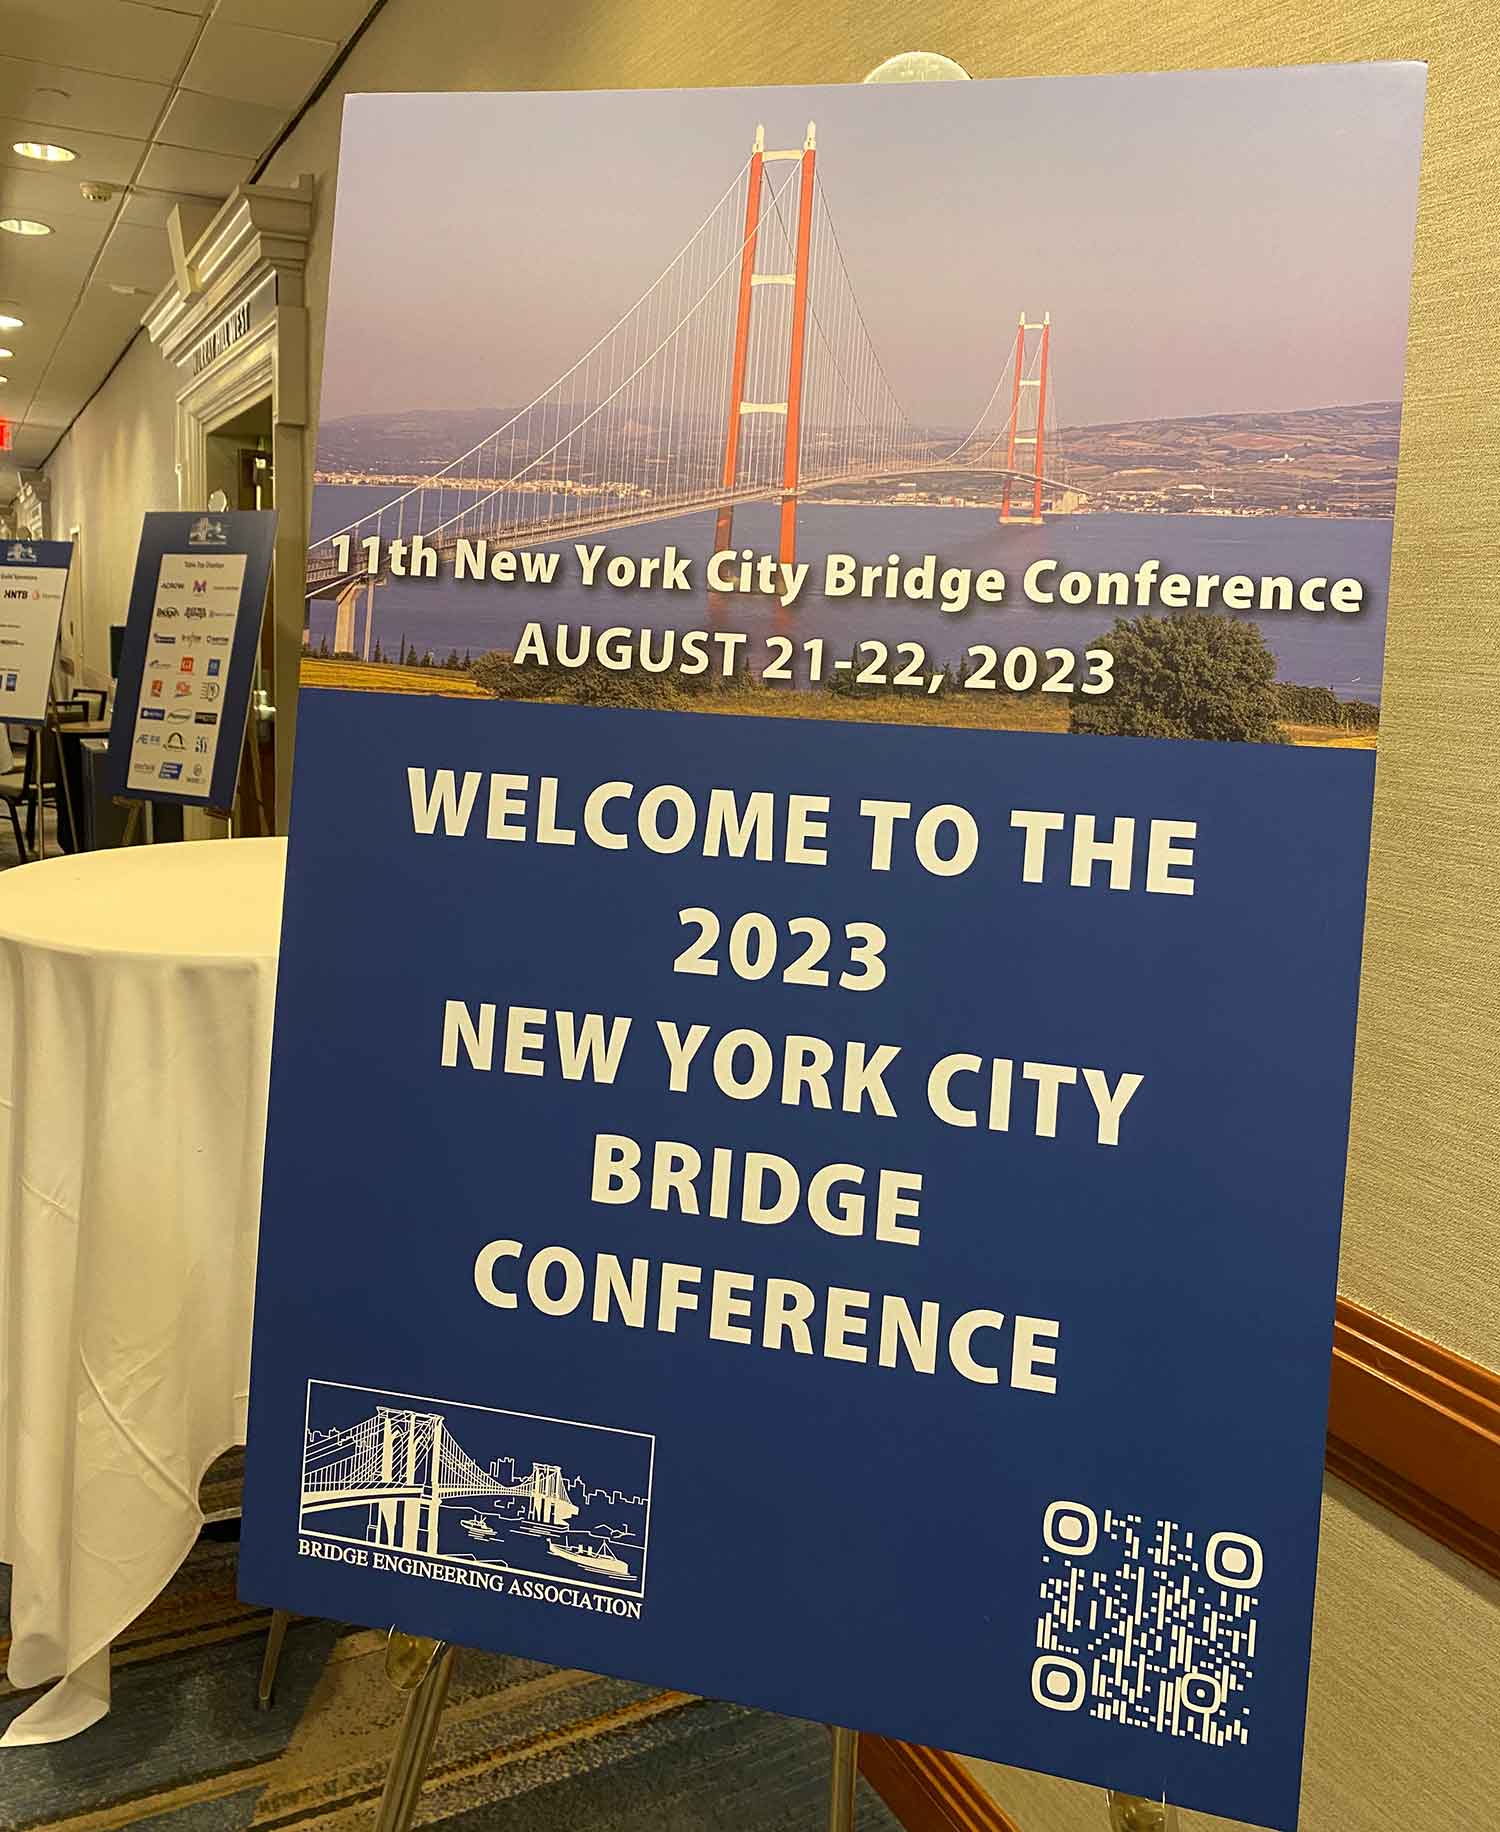 the bridge cable wire breaks monitoring system showcase at the 11th New York City Bridge Conference